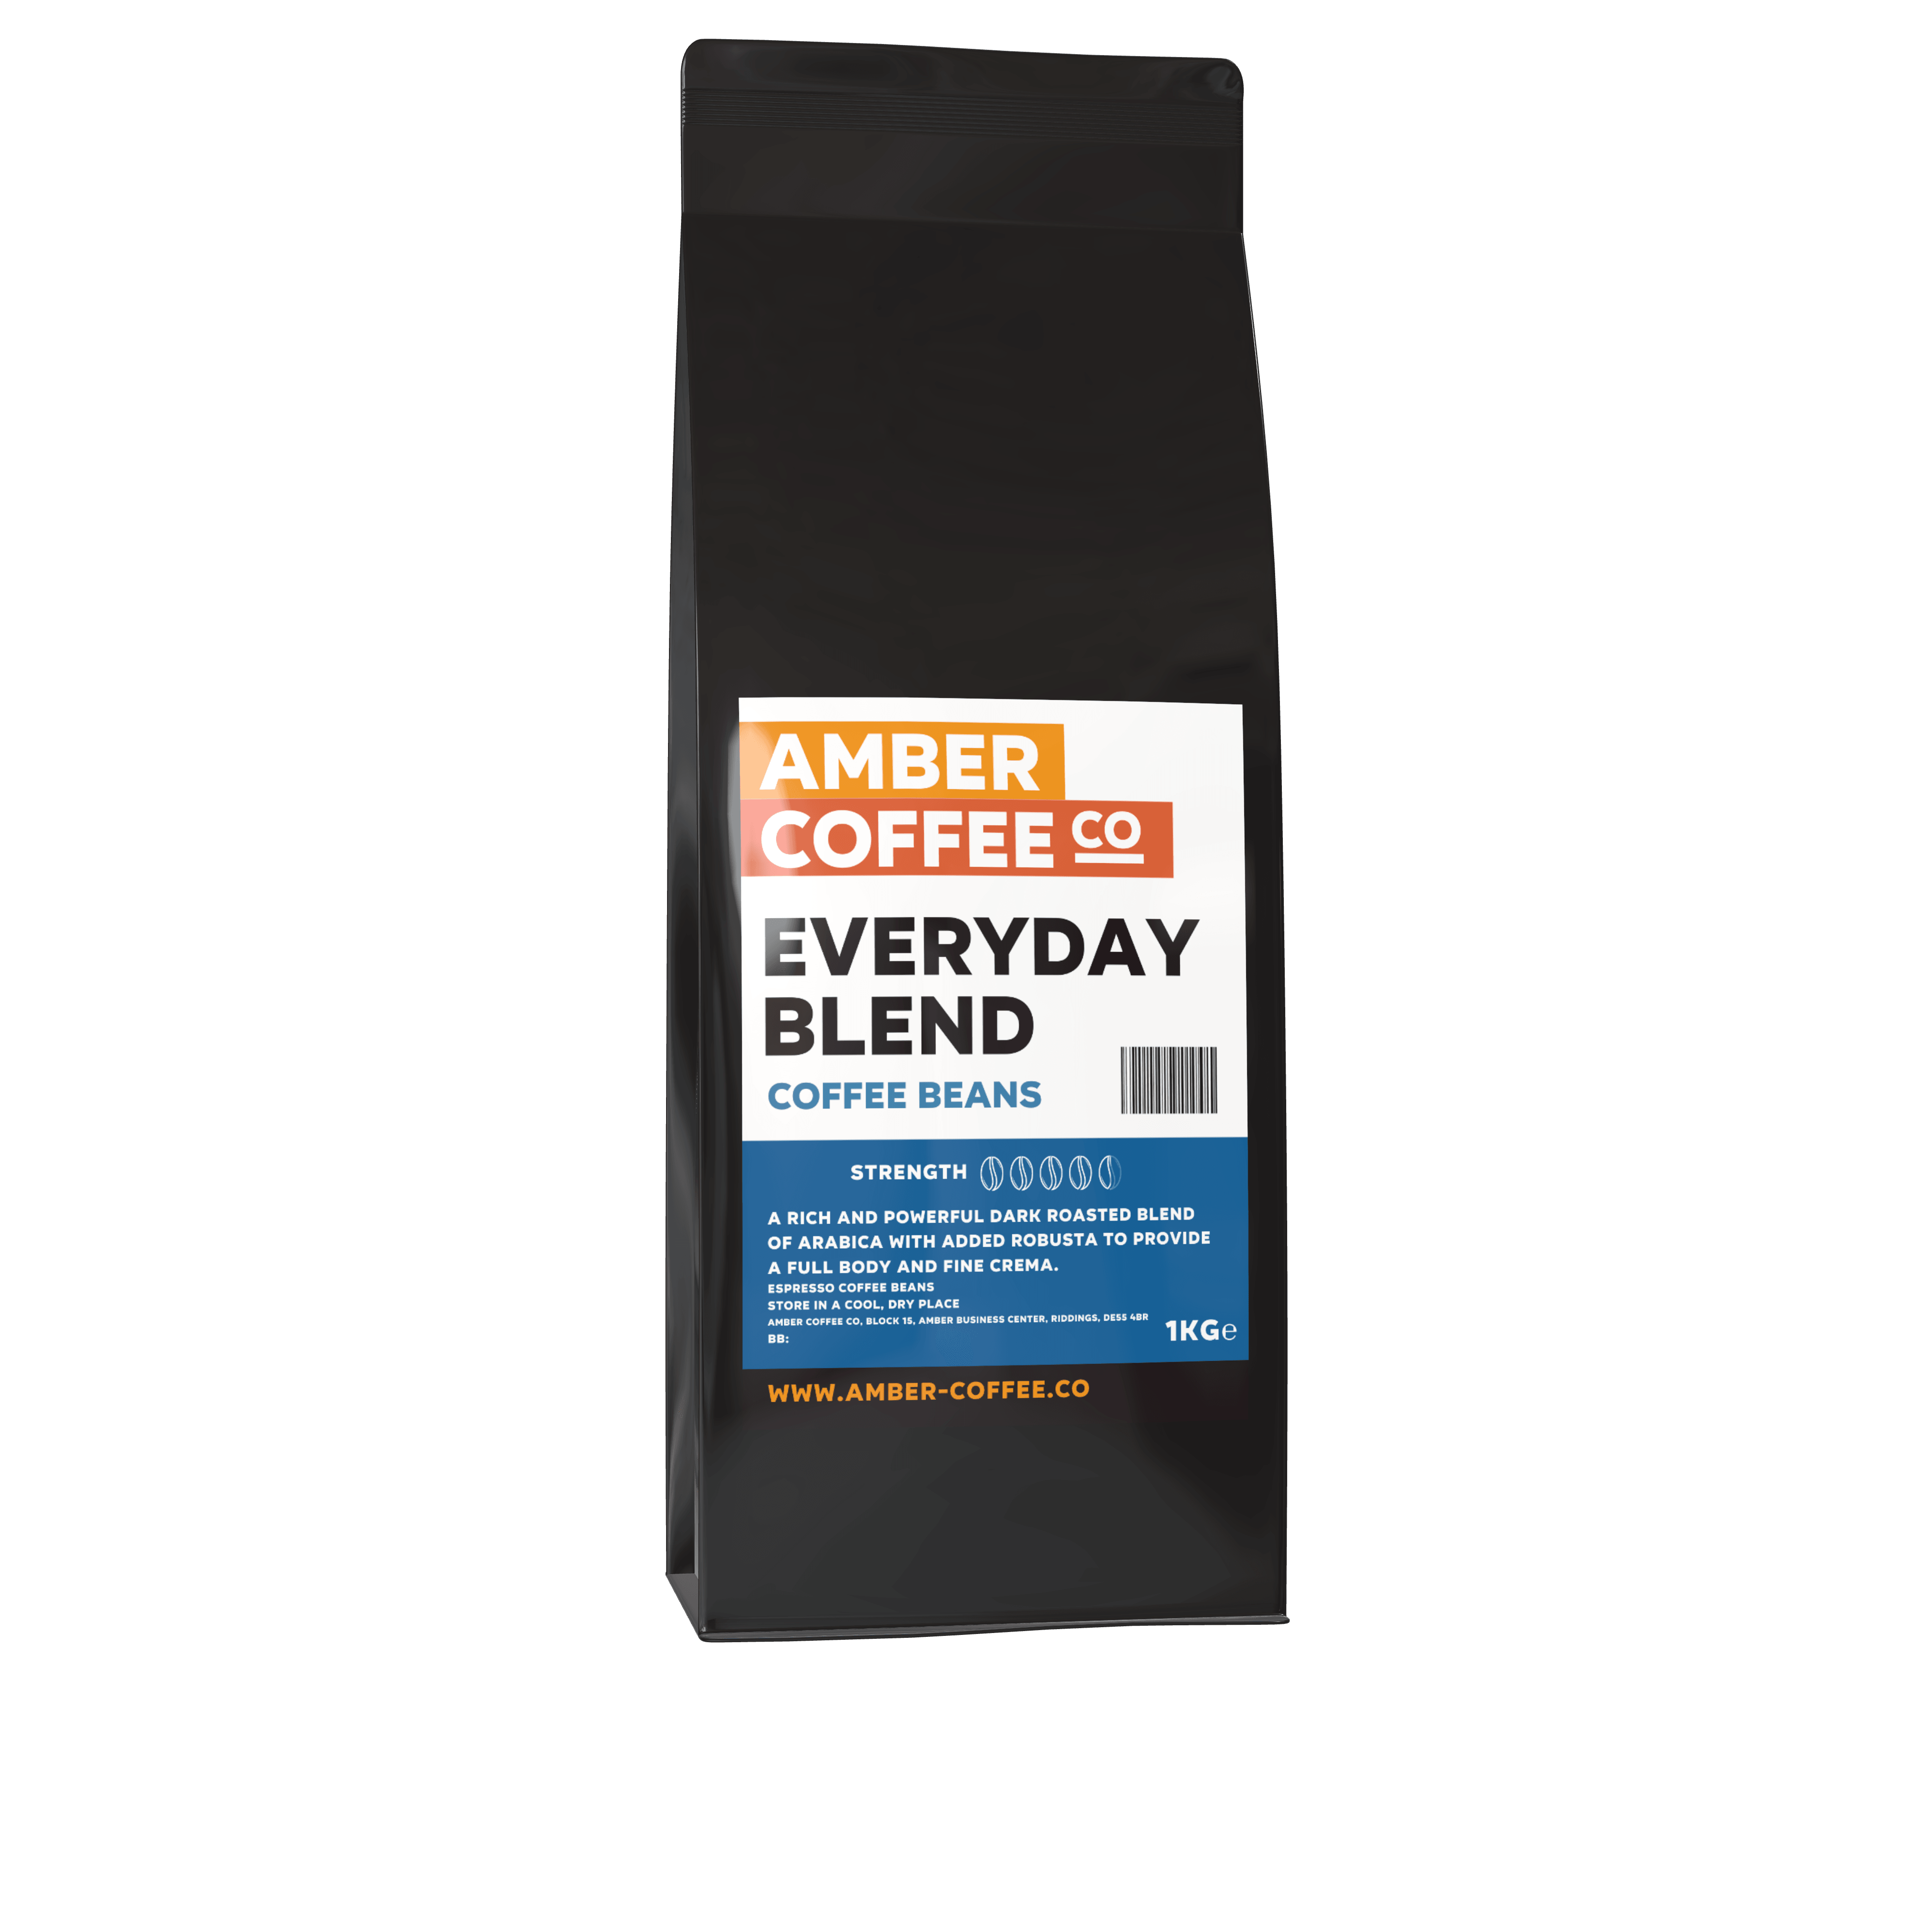 Amber Coffee Co - Everyday Blend - Premium Coffee Beans (Full Case or 1KG Bags) - Vending Superstore